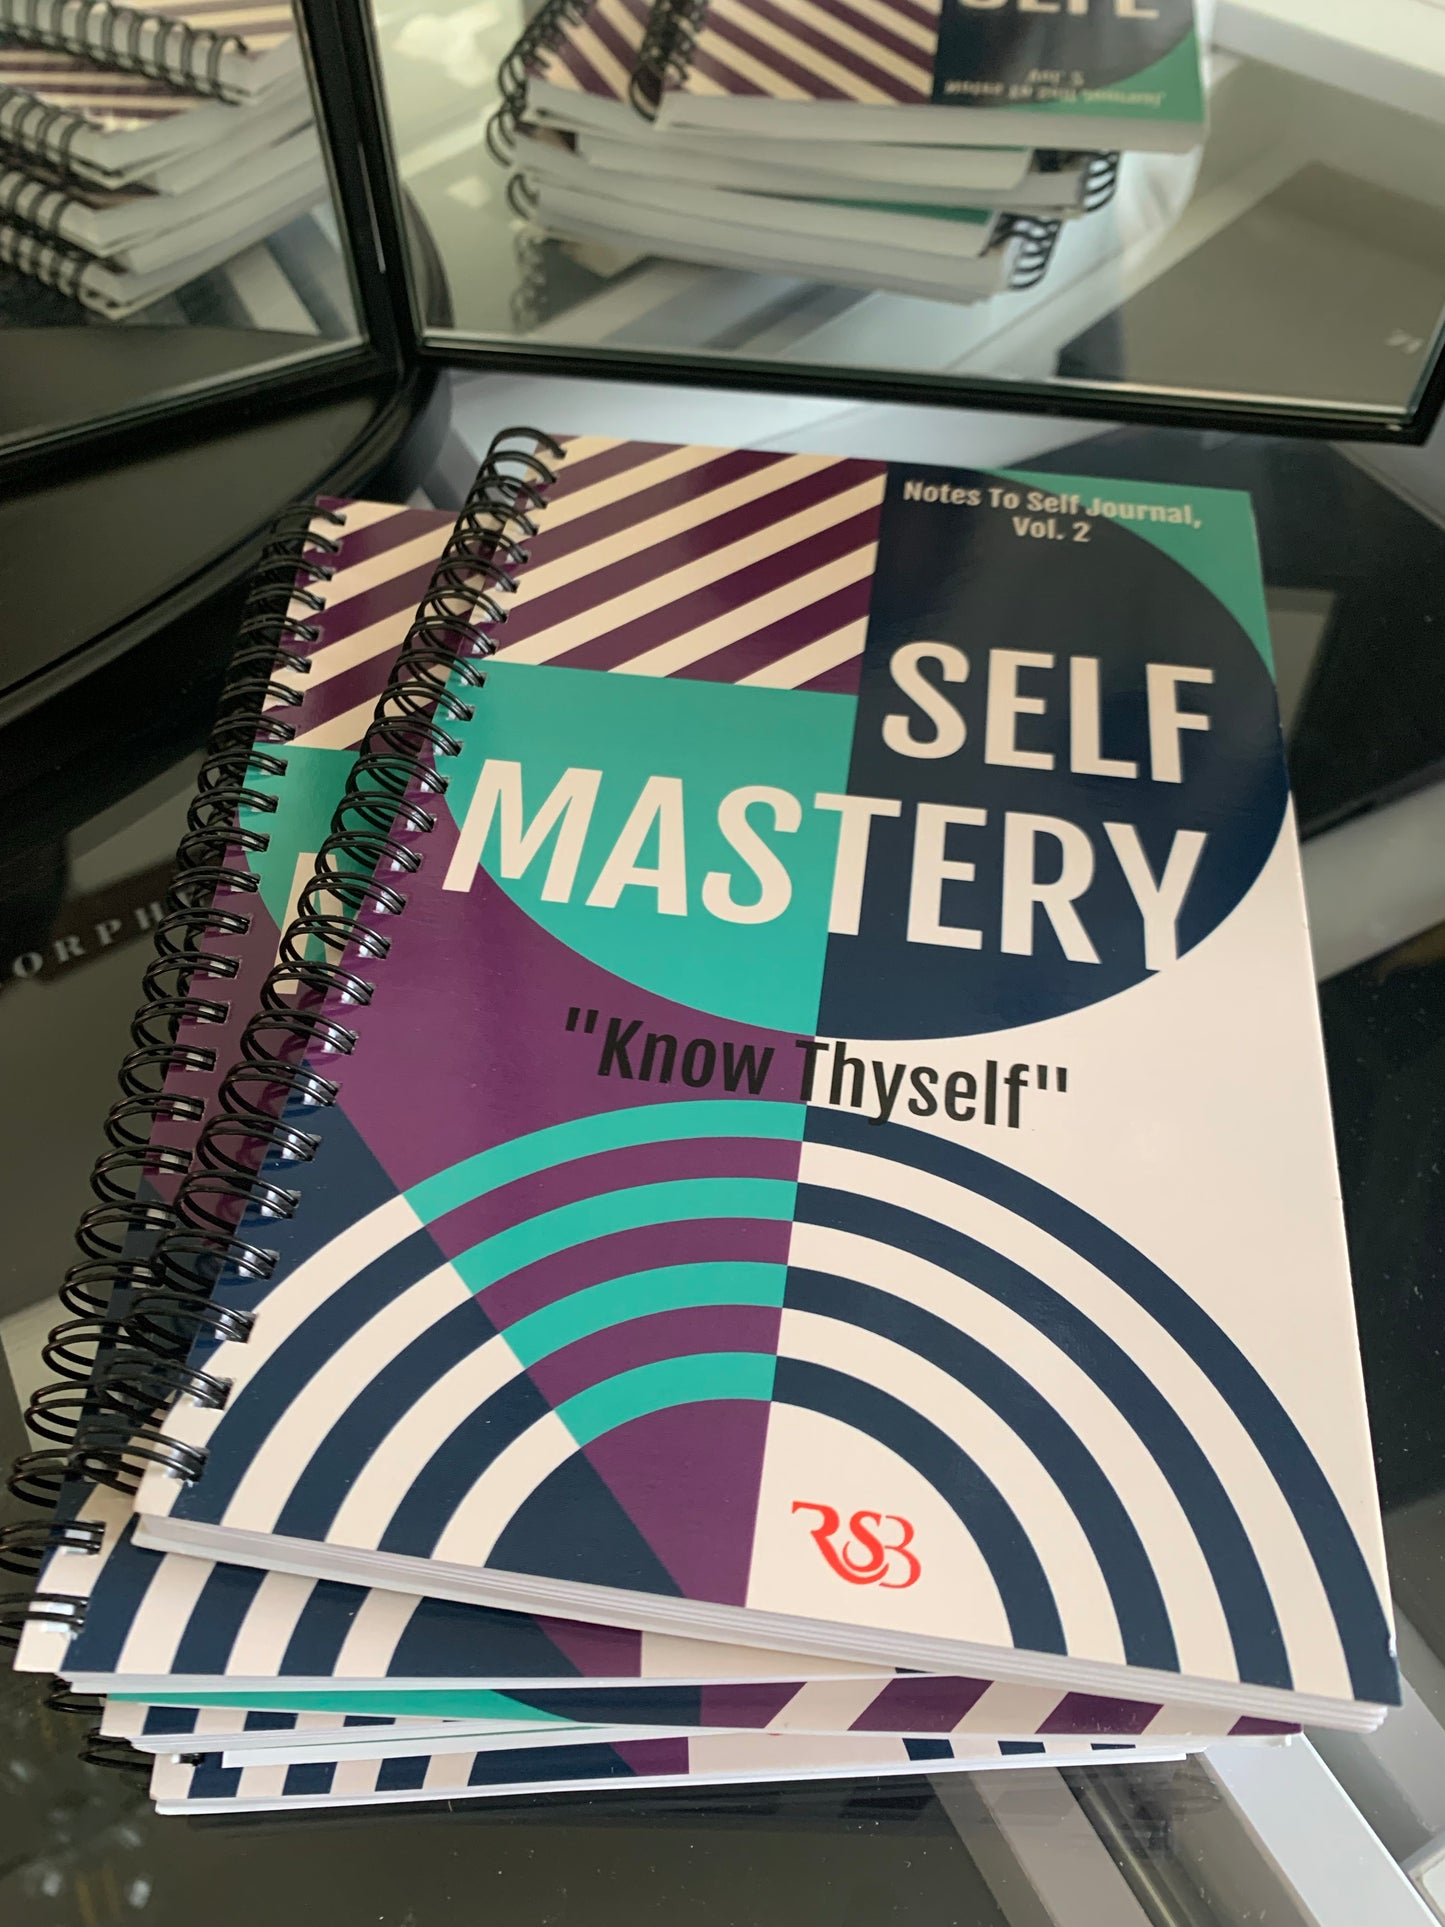 Notes To Self Journal, Vol. 2: SELF MASTERY